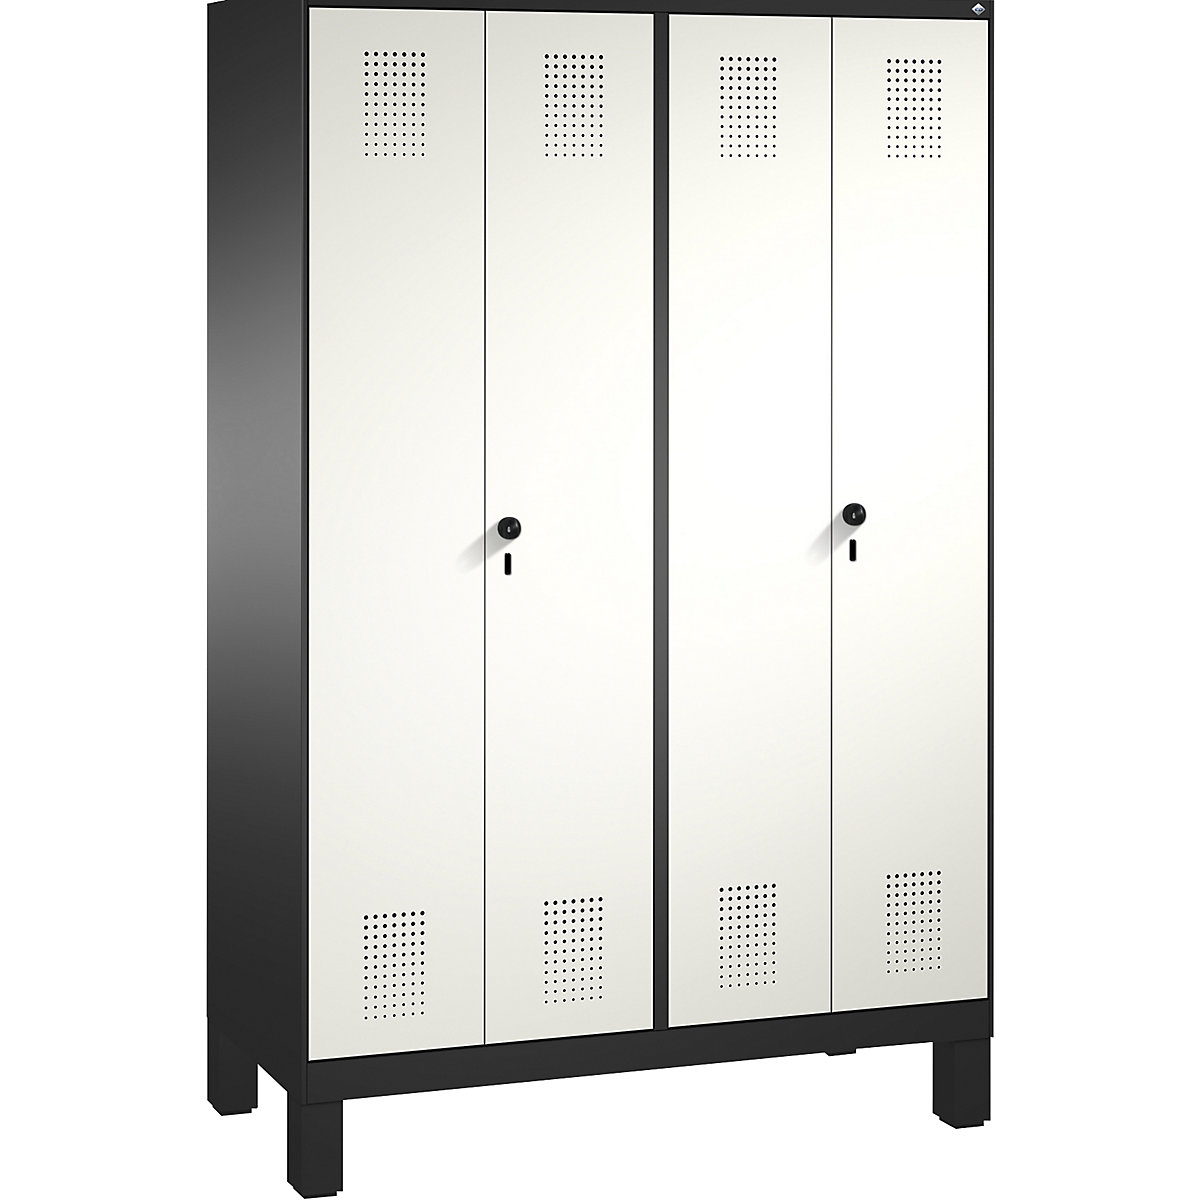 EVOLO cloakroom locker, doors close in the middle – C+P